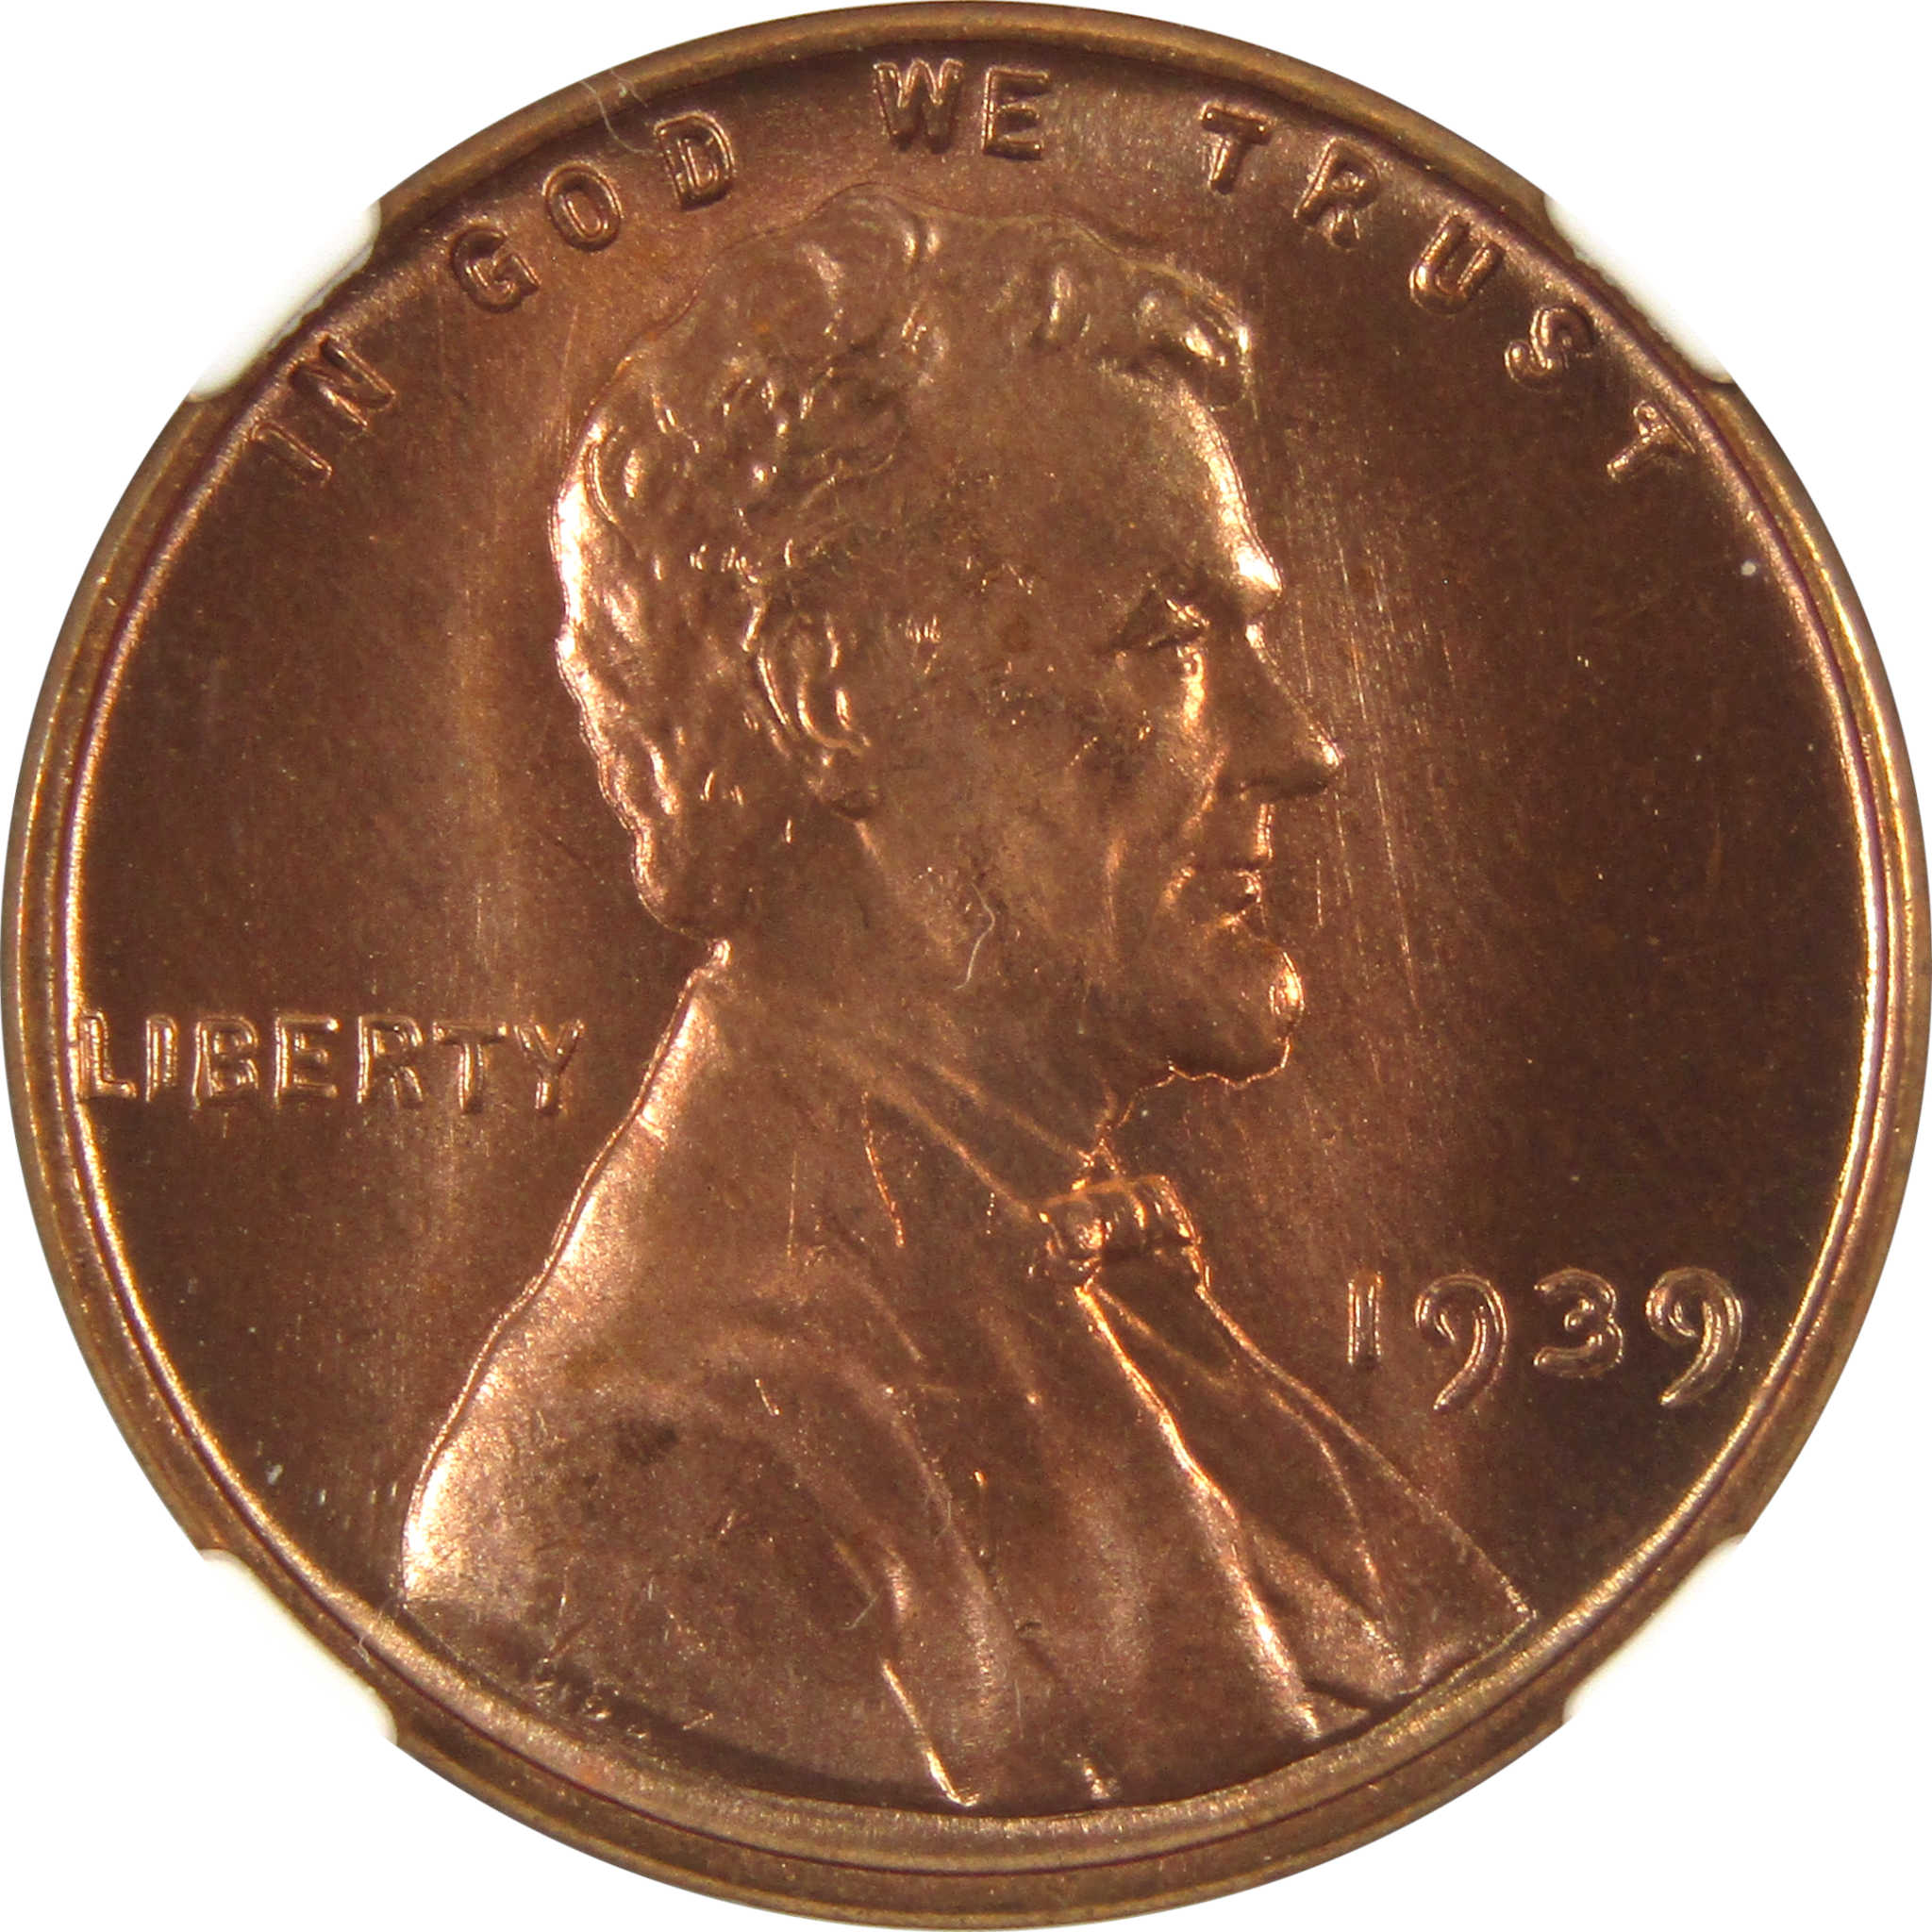 1939 Lincoln Wheat Cent MS 67 RD NGC Penny 1c Uncirculated SKU:I9715